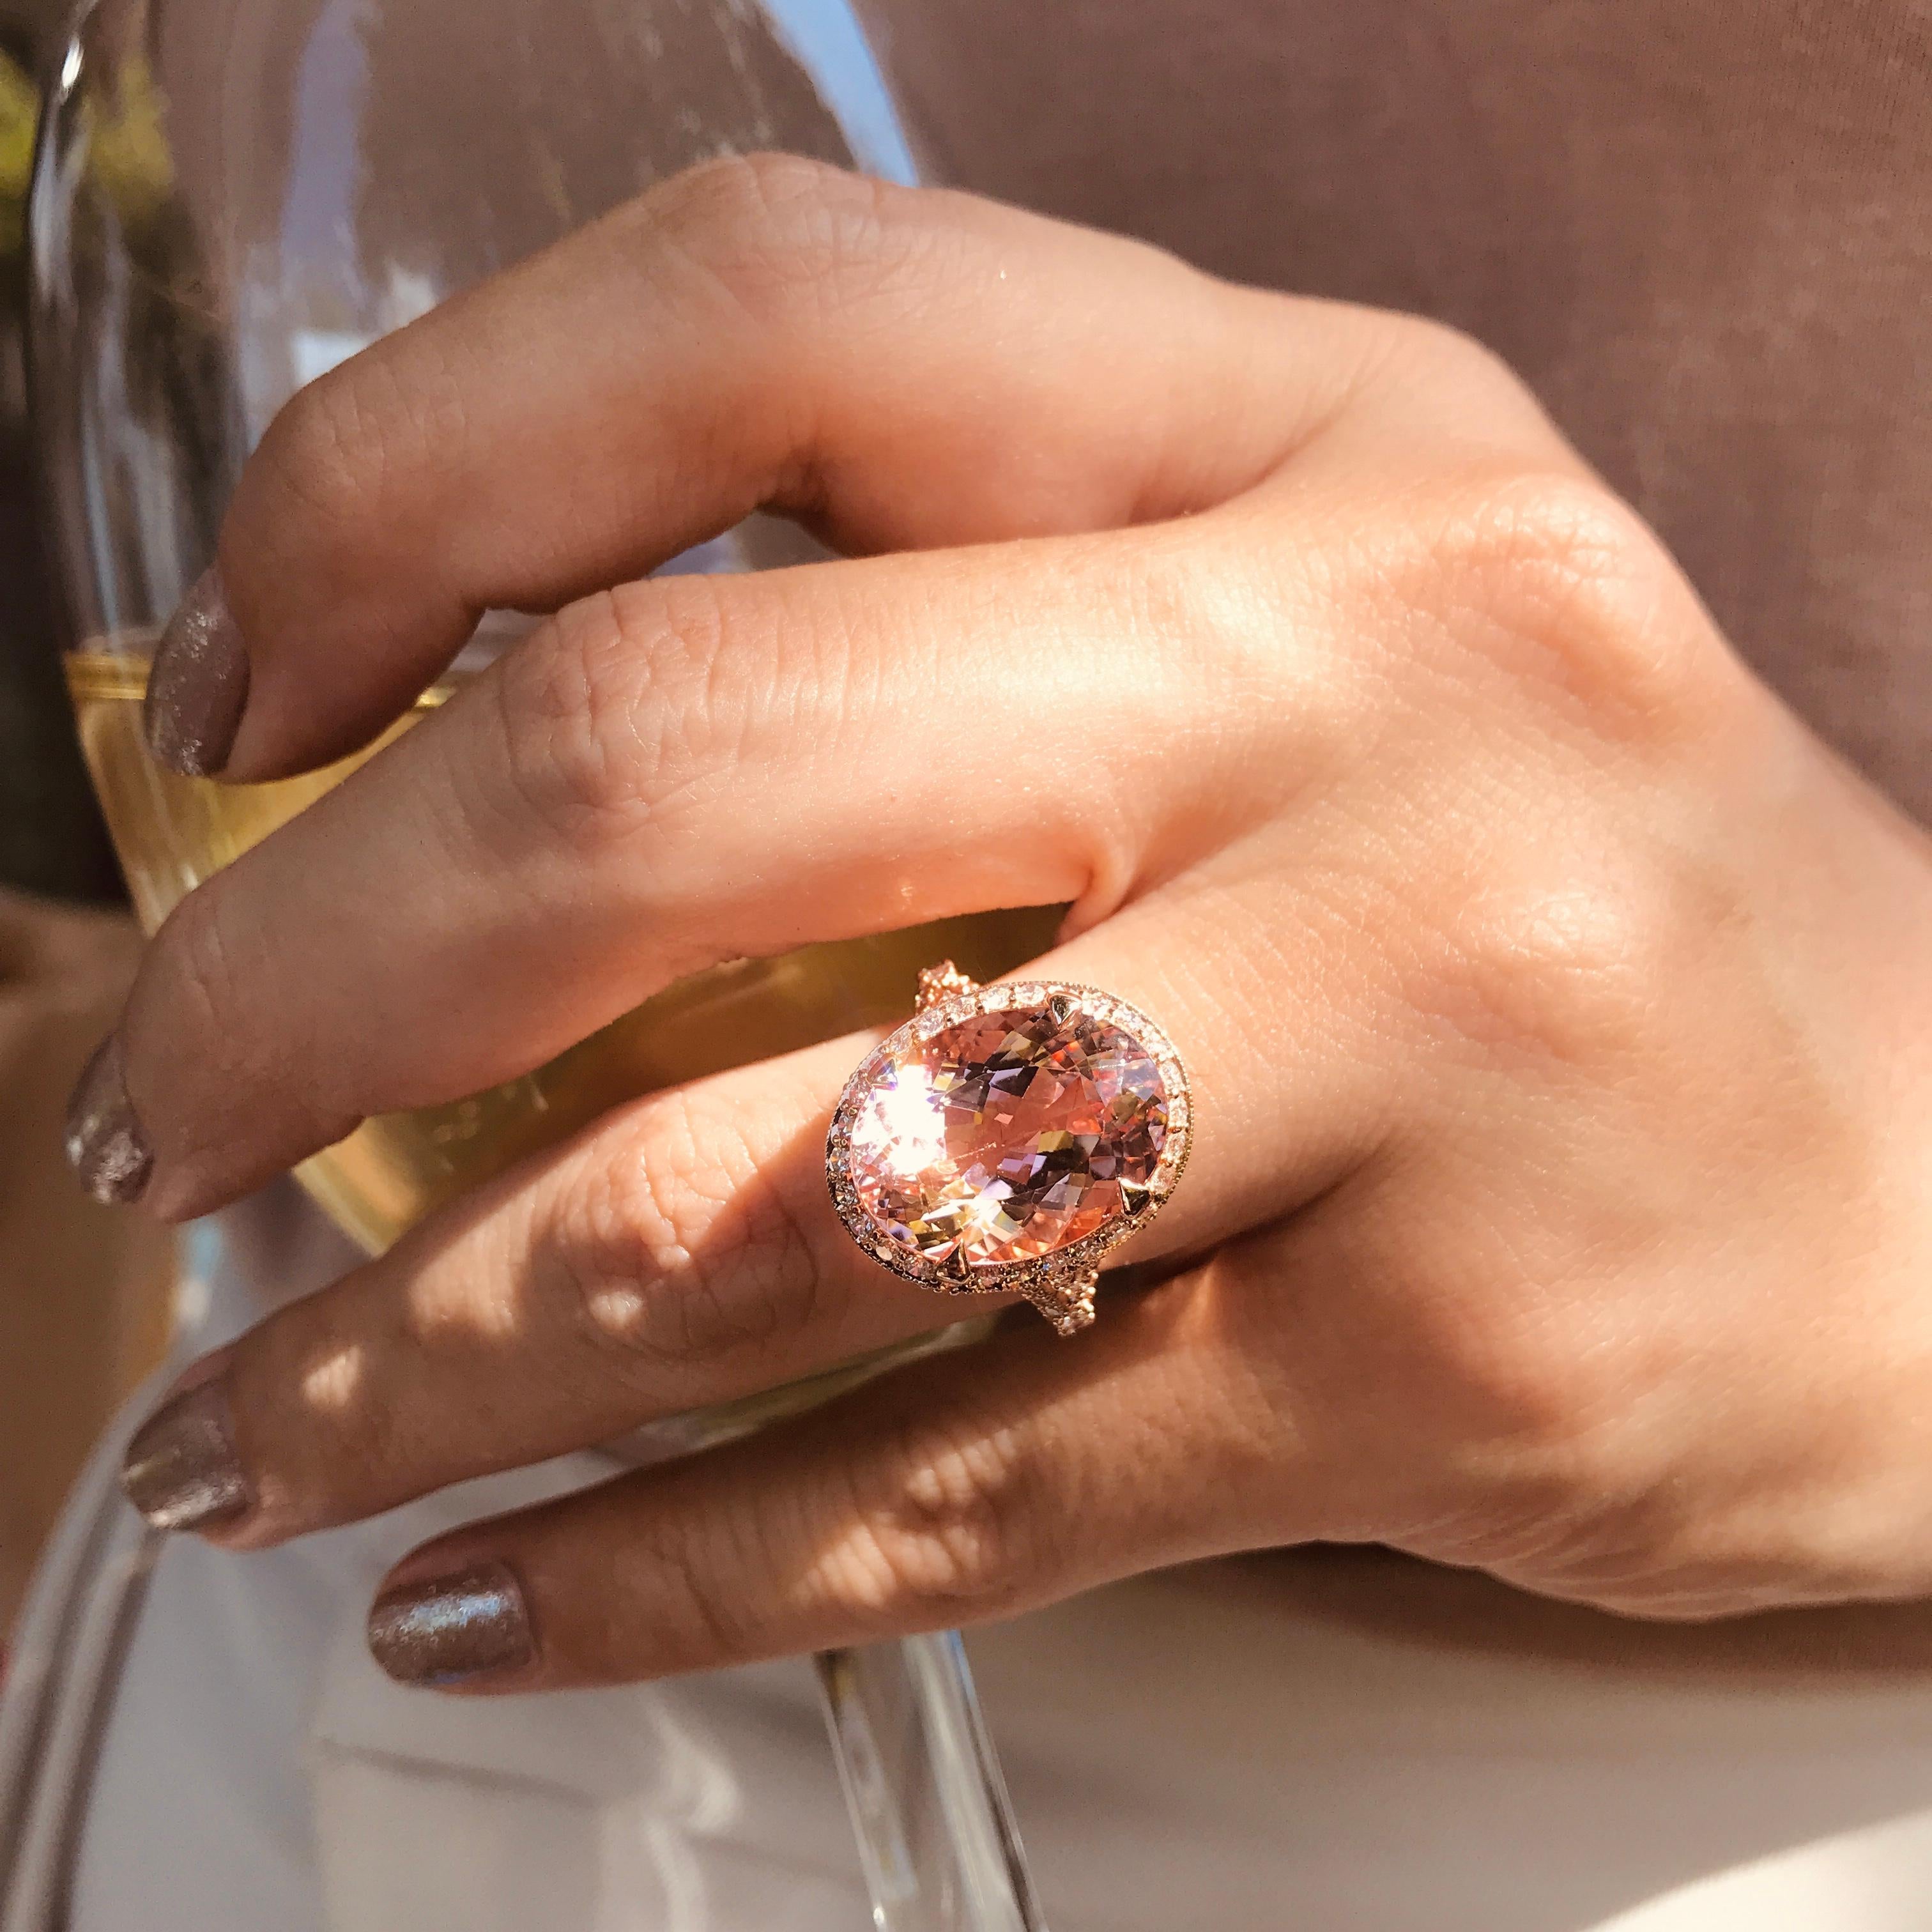 This stylish 9.60 ct. Oval Morganite and Diamond 18K Pink Gold Cocktail Ring will lend an eye-catching touch of sparkle to your look. Crafted in lustrous pink gold, the ring features an oval-cut morganite gemstone and 88 round-cut diamonds